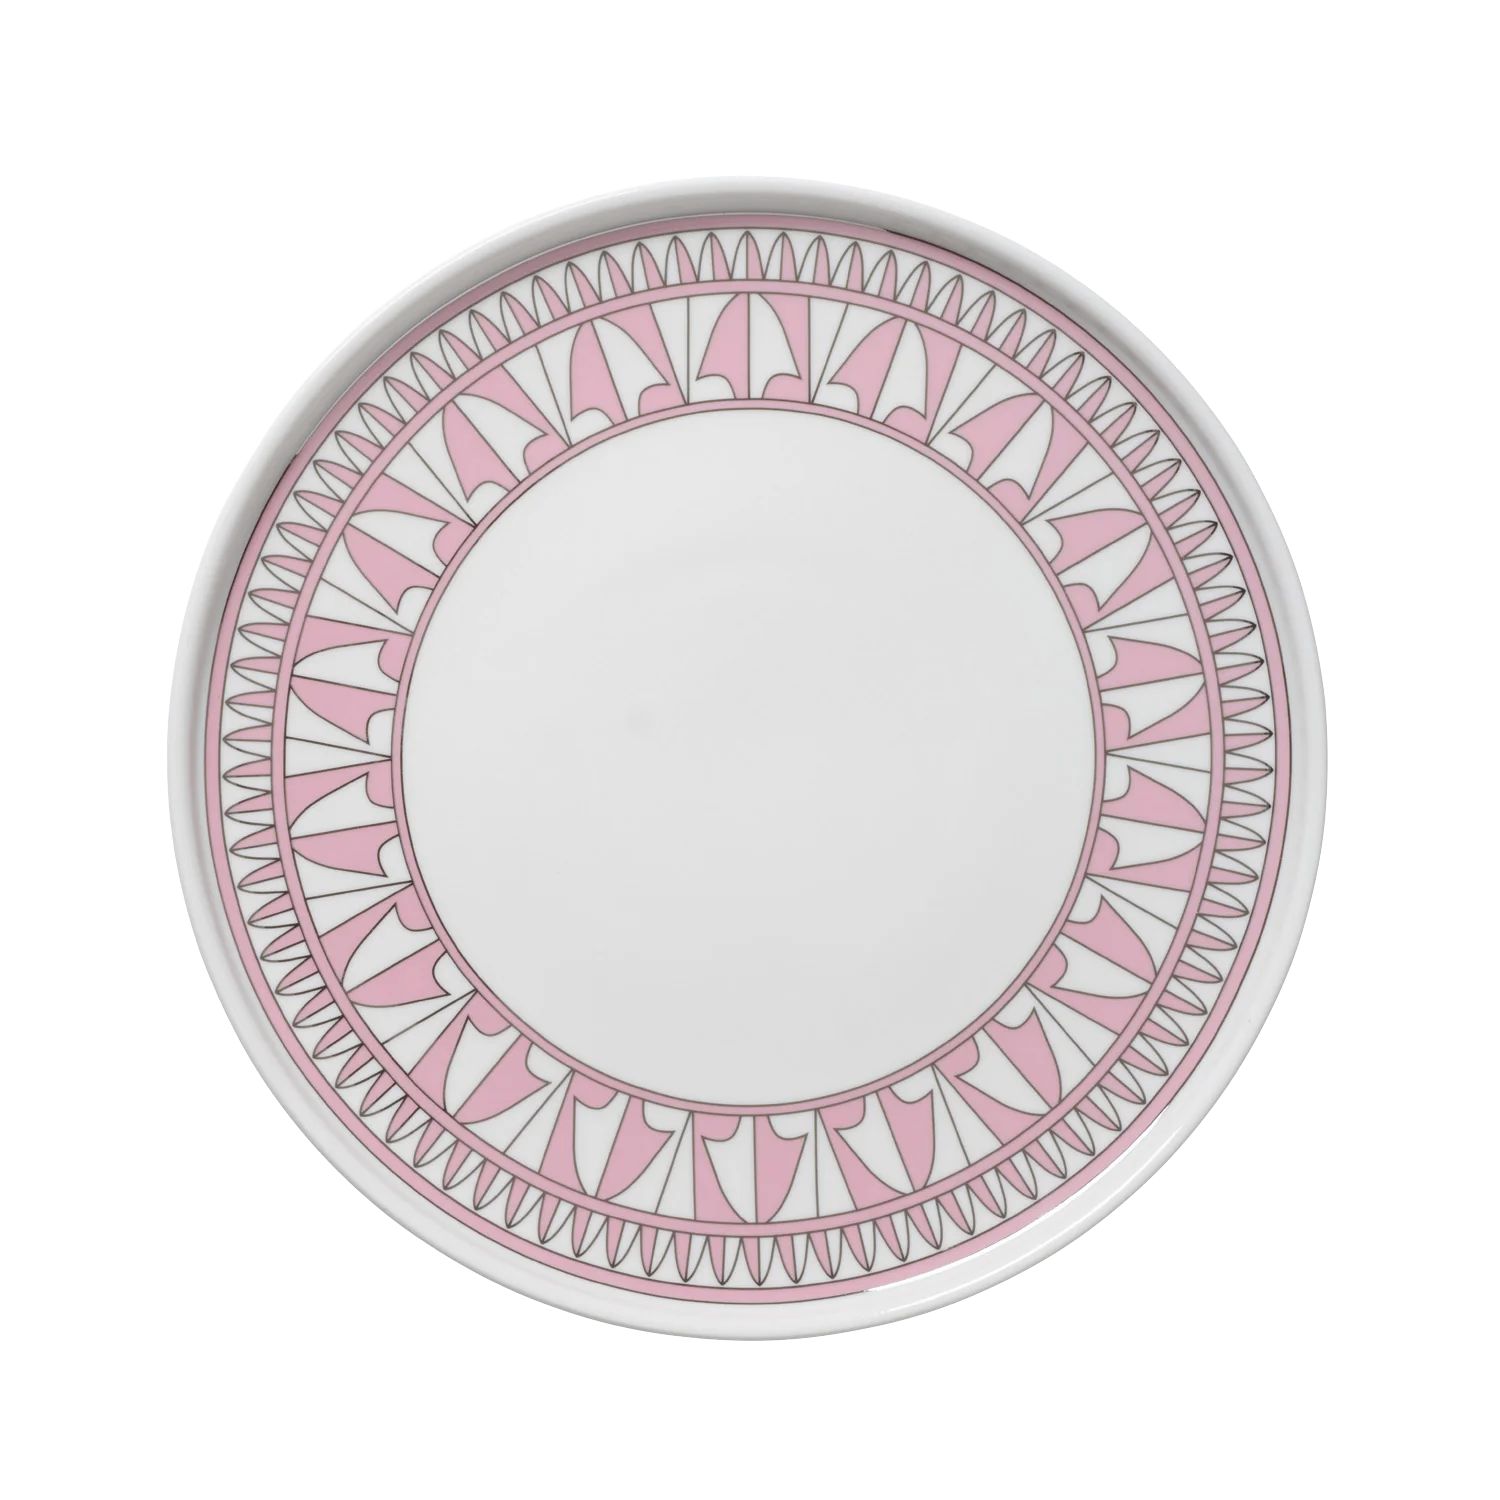 Pale Pink and Silver Geometric Plate 1 | In the Roundhouse